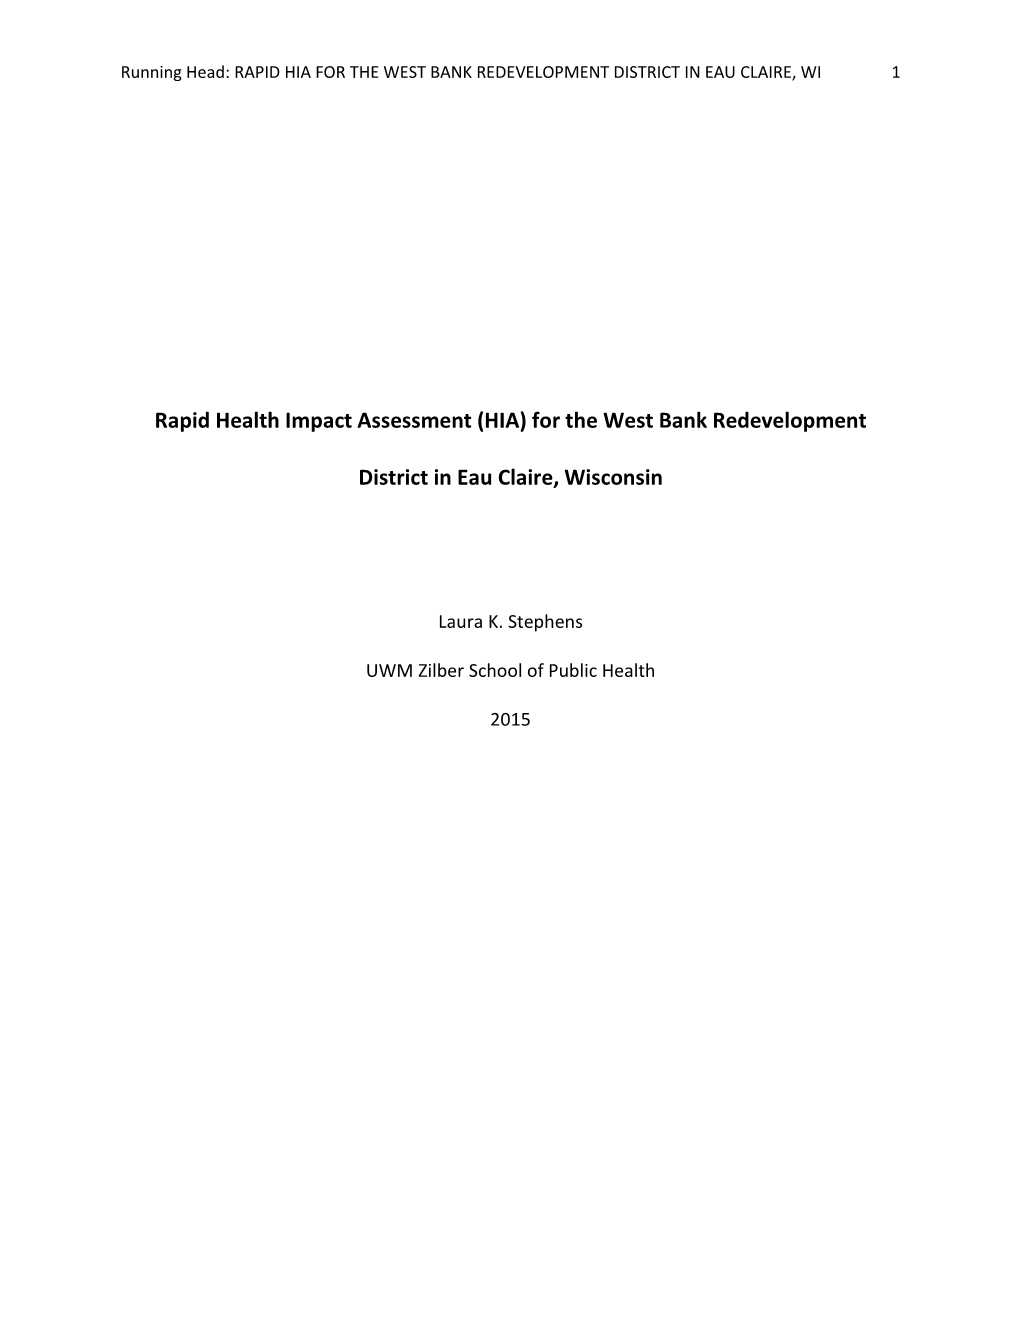 Rapid Health Impact Assessment (HIA) for the West Bank Redevelopment